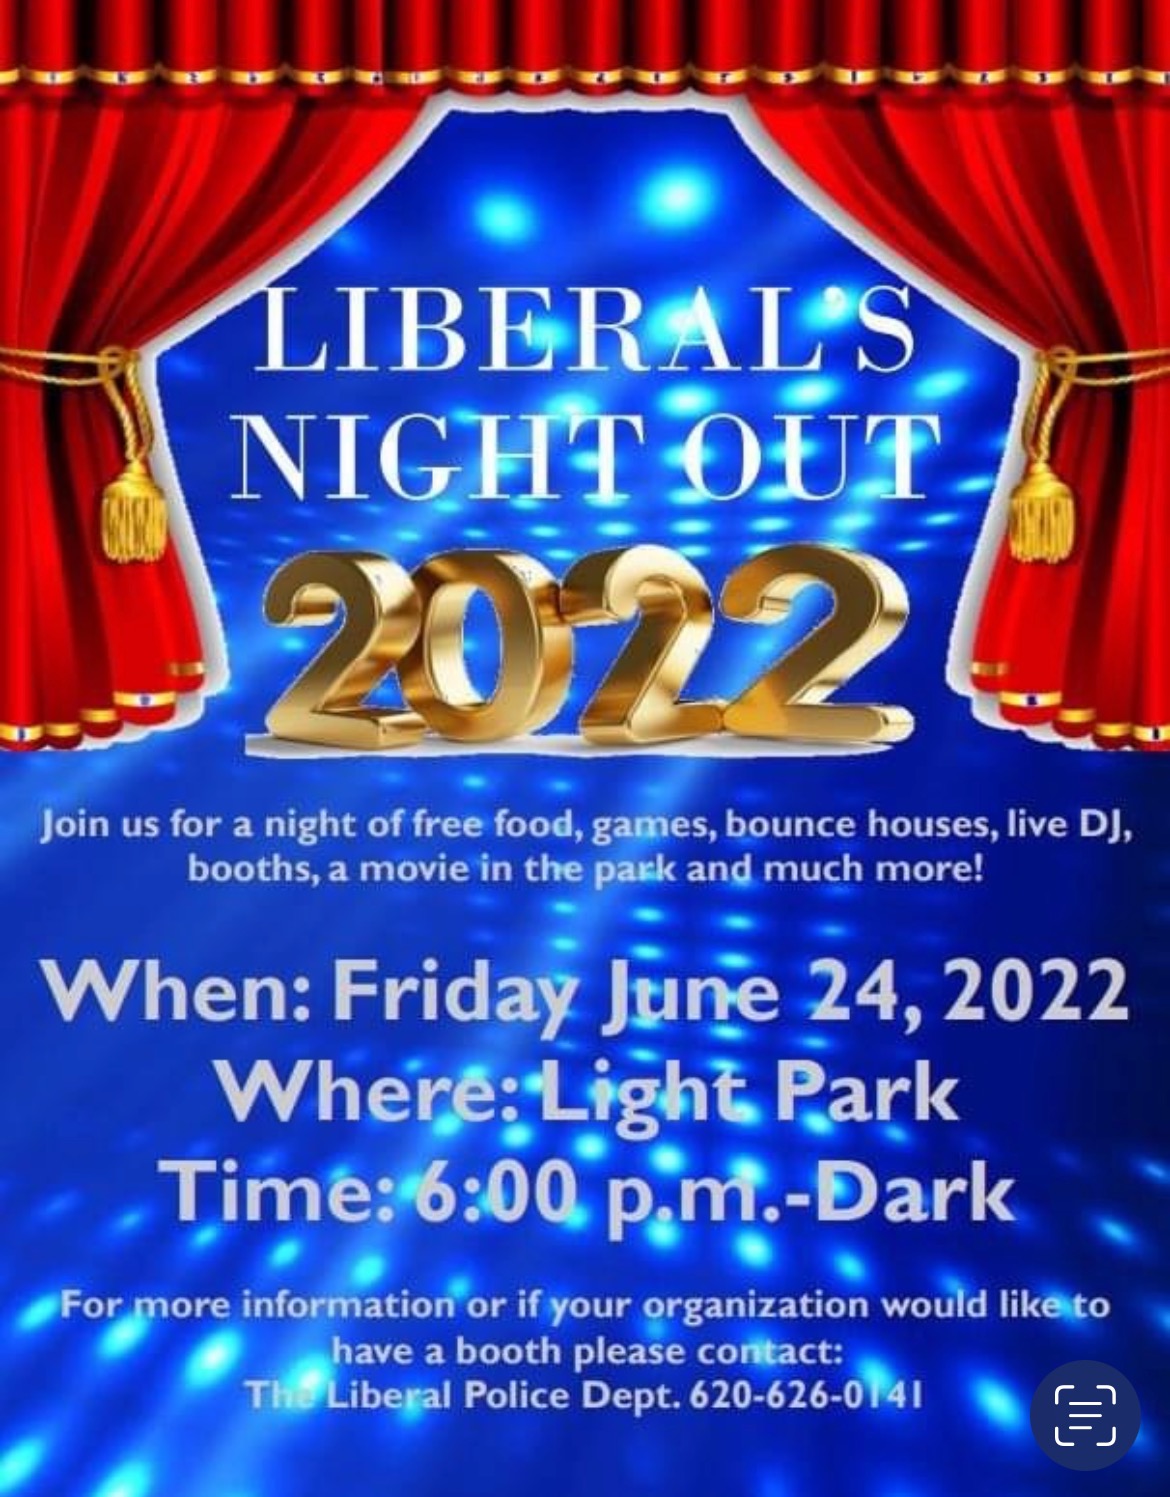 Liberal’s Night Out is Friday in Light Park